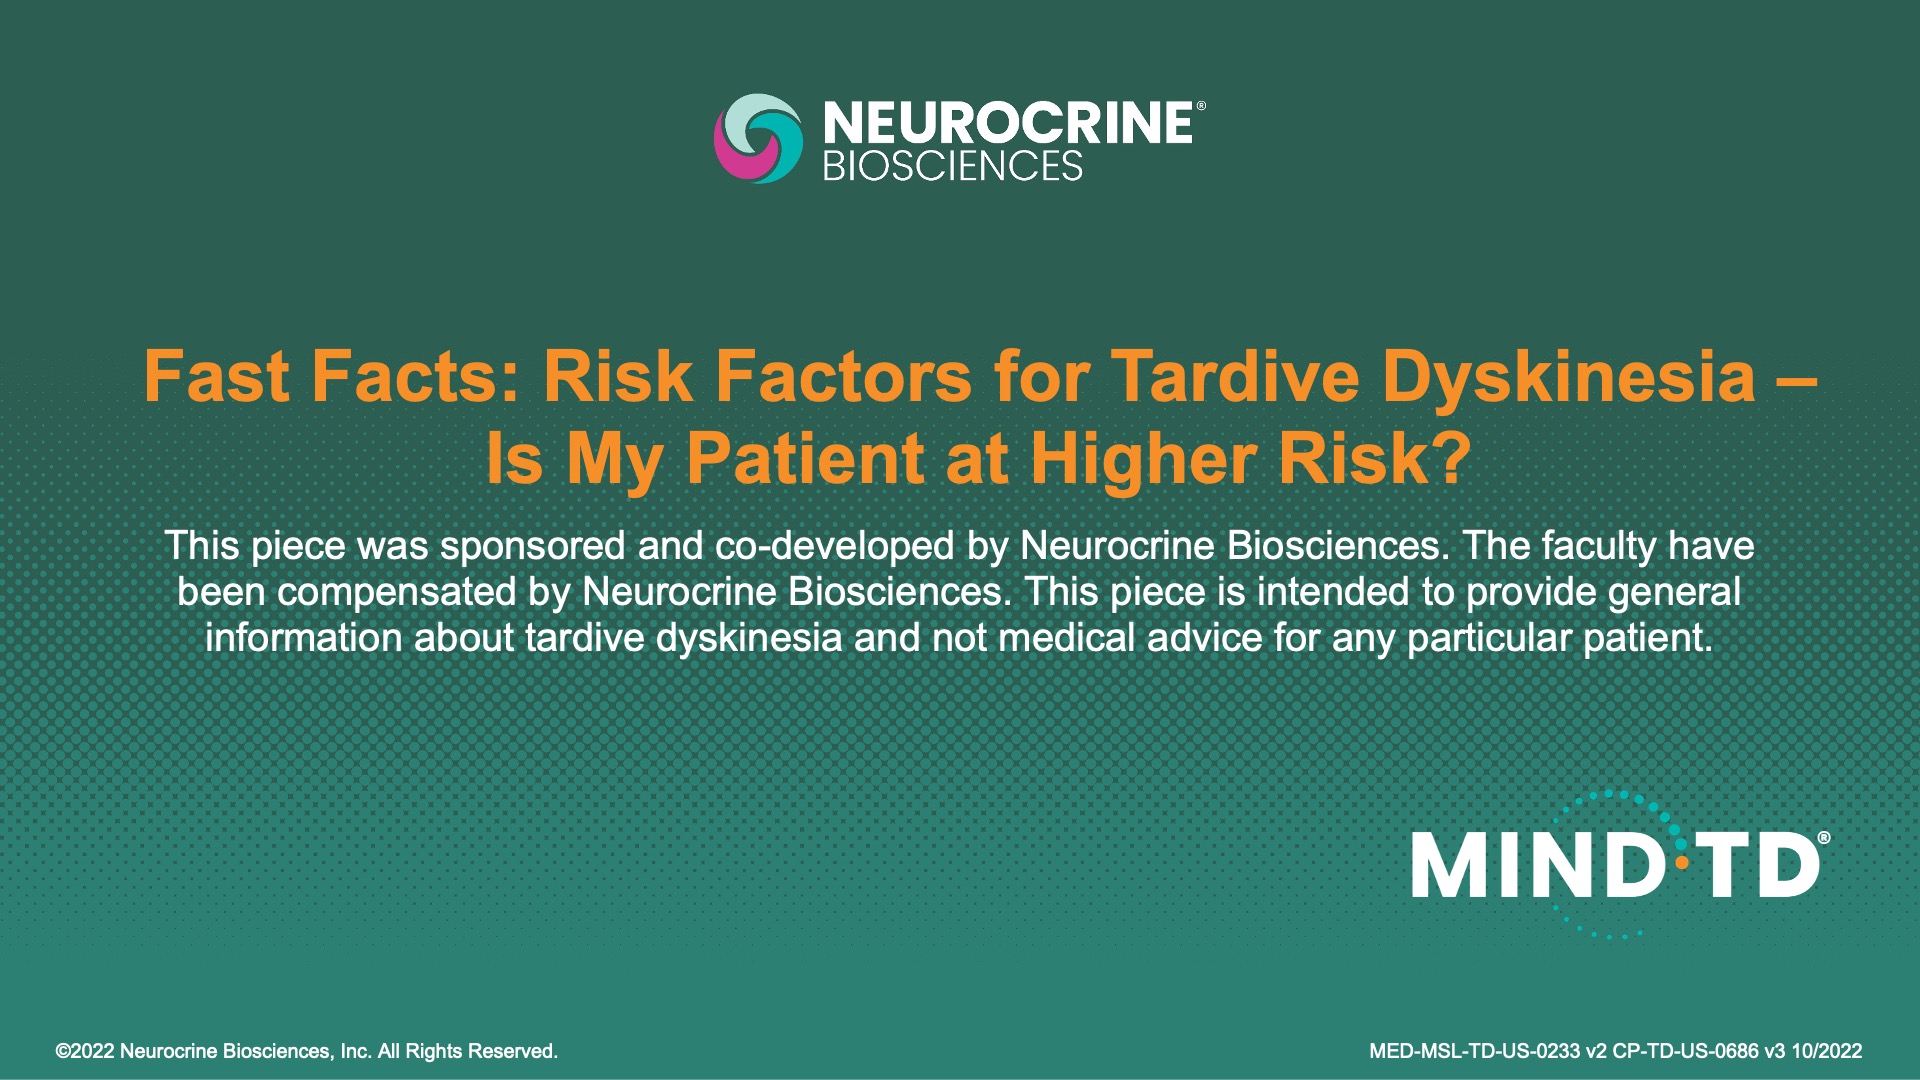 FAST FACTS: RISK FACTORS FOR TARDIVE DYSKINESIA &ndash; IS MY PATIENT AT HIGHER RISK?
This piece was sponsored and co-developed by Neurocrine Biosciences. The faculty have been compensated by Neurocrine Biosciences. This piece is intended to provide general information about tardive dyskinesia and not medical advice for any particular patient.
&copy;2022 Neurocrine Biosciences, Inc. All Rights Reserved.
MED-MSL-TD-US-0233 V2 CP-TD-US-0686 v3 10/2022